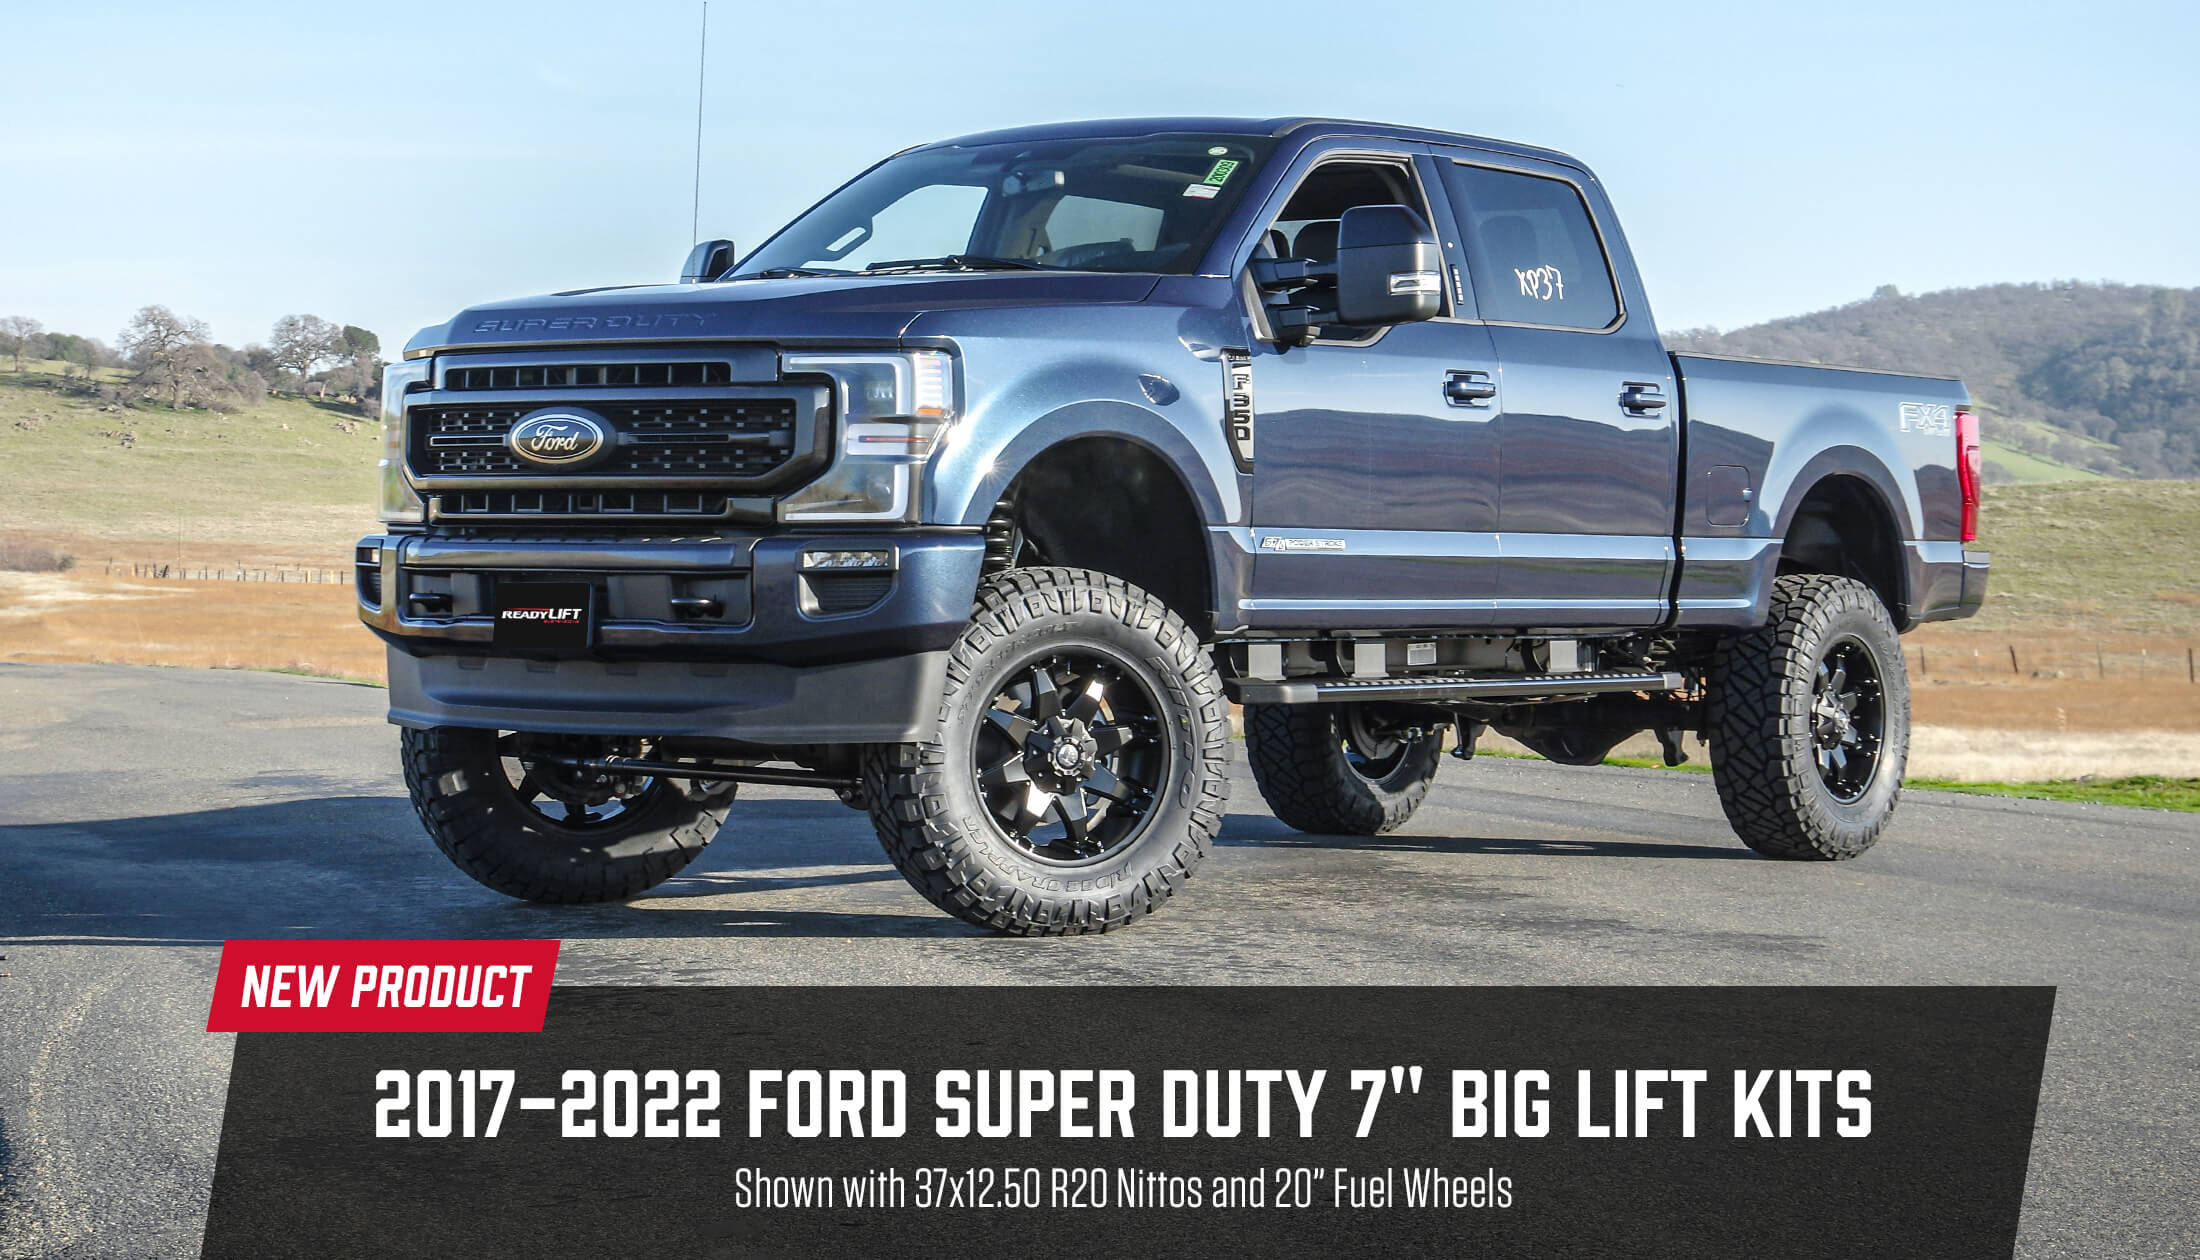 Readylift Introduces An All New Ford Super Duty Coil Spring Lift Kit Readylift